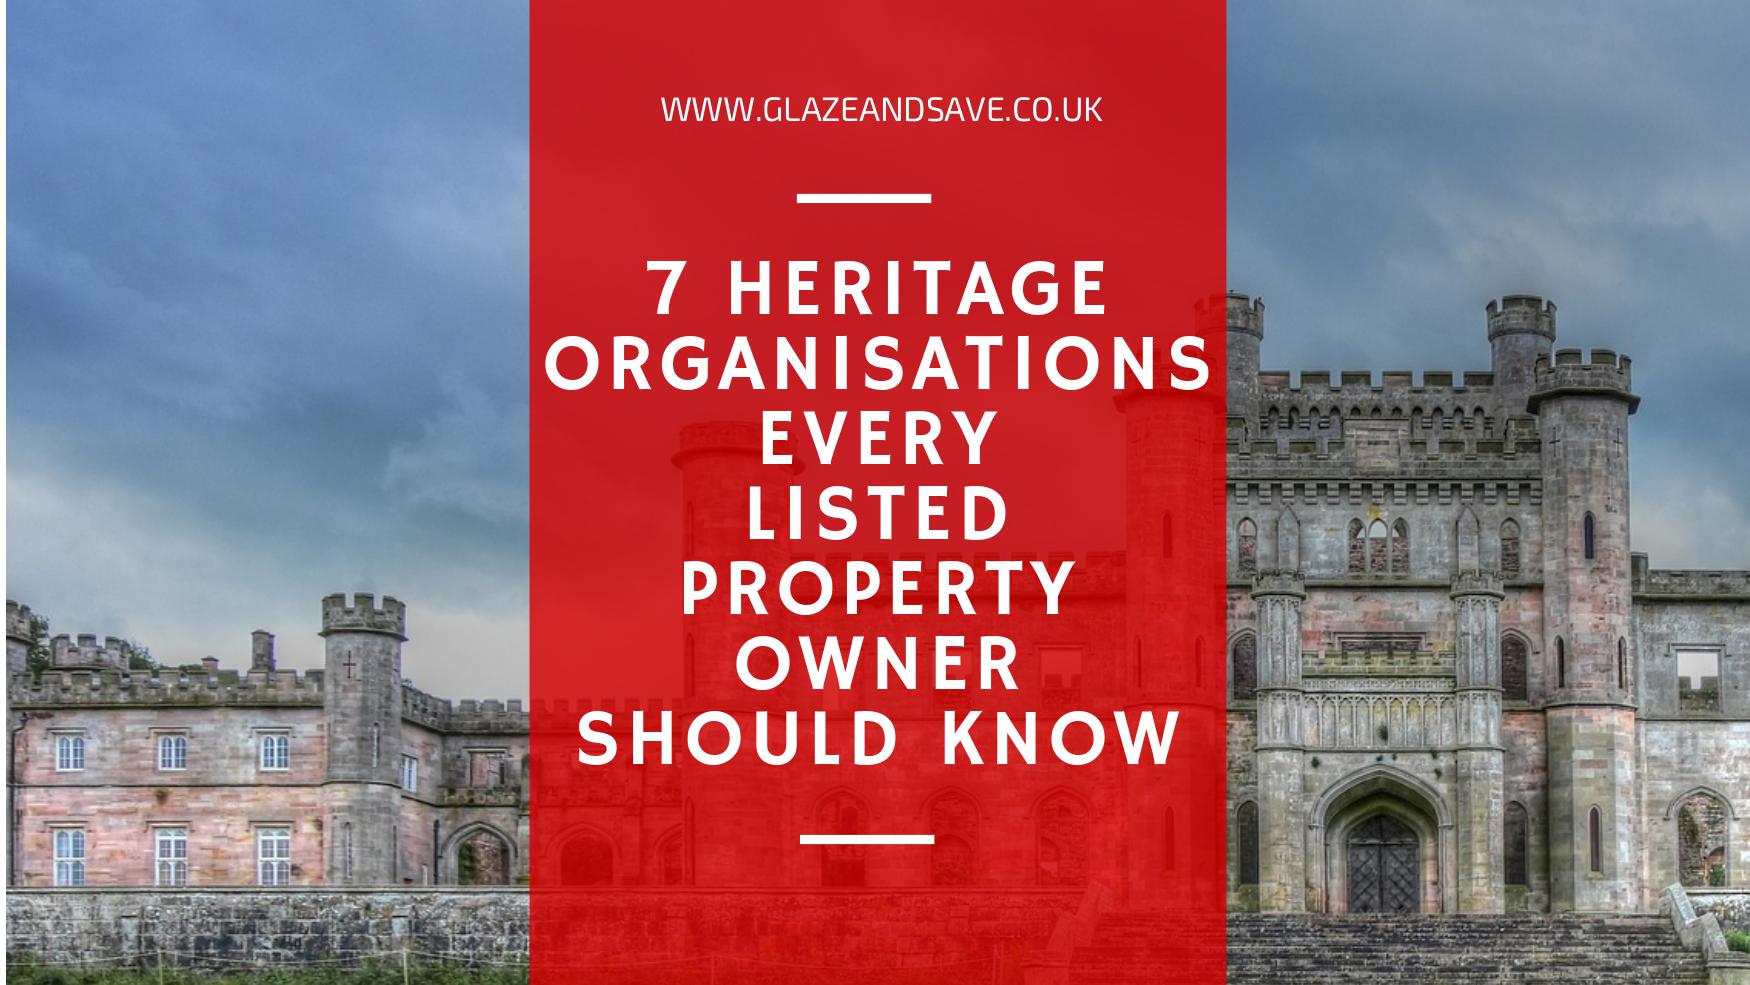 7 Heritage organisations every listed property owner should know by Glaze & Save